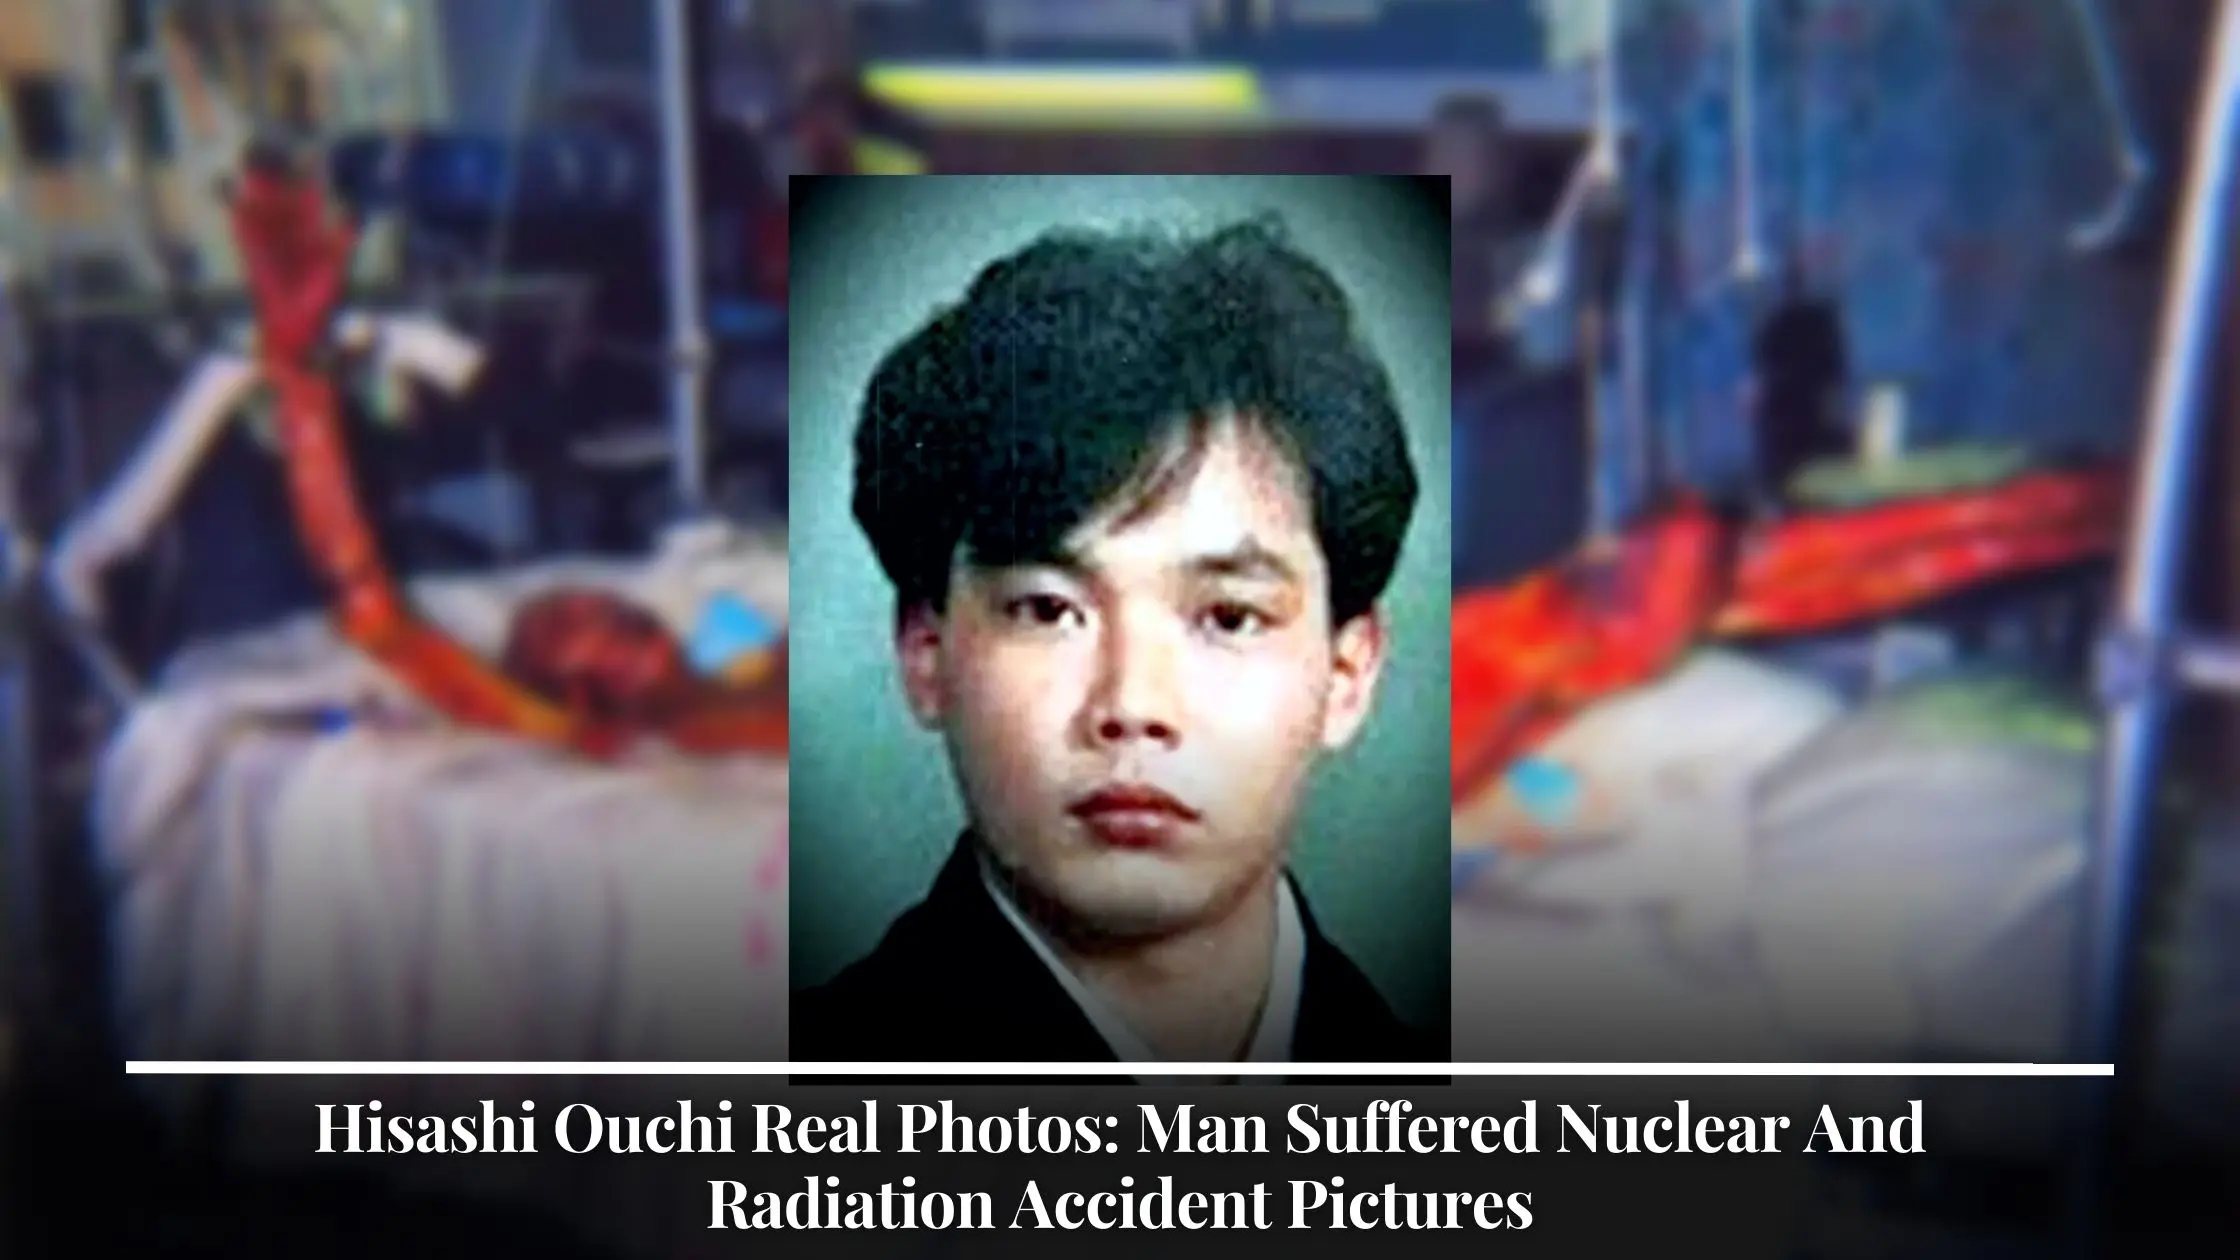 Hisashi Ouchi Real Photos Man Suffered Nuclear And Radiation Accident Pictures